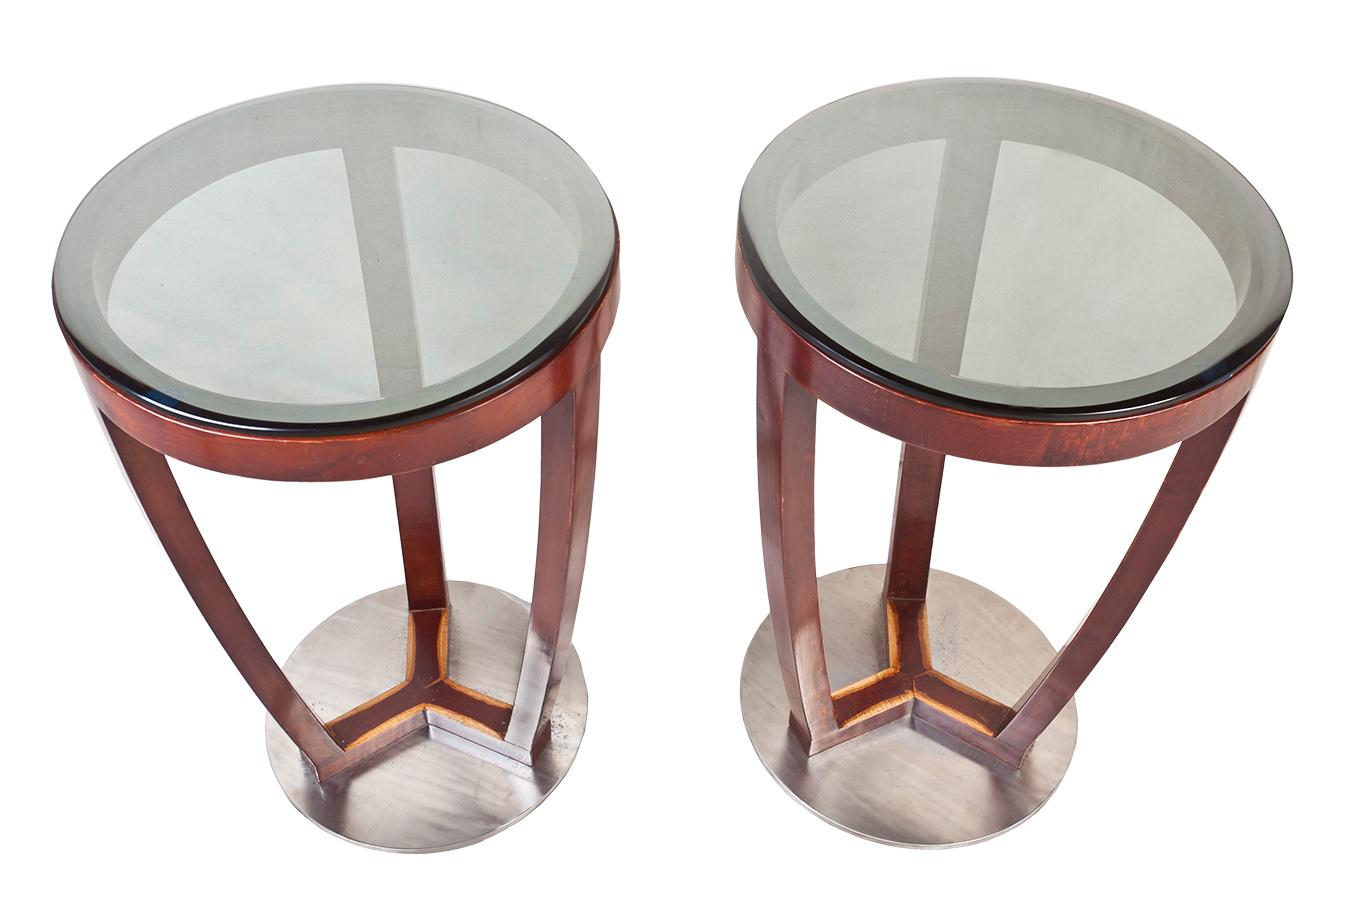 Pair of Mid-Century Modern teak side tables with chrome base and beveled, smoked glass tops not attached. Refinished.